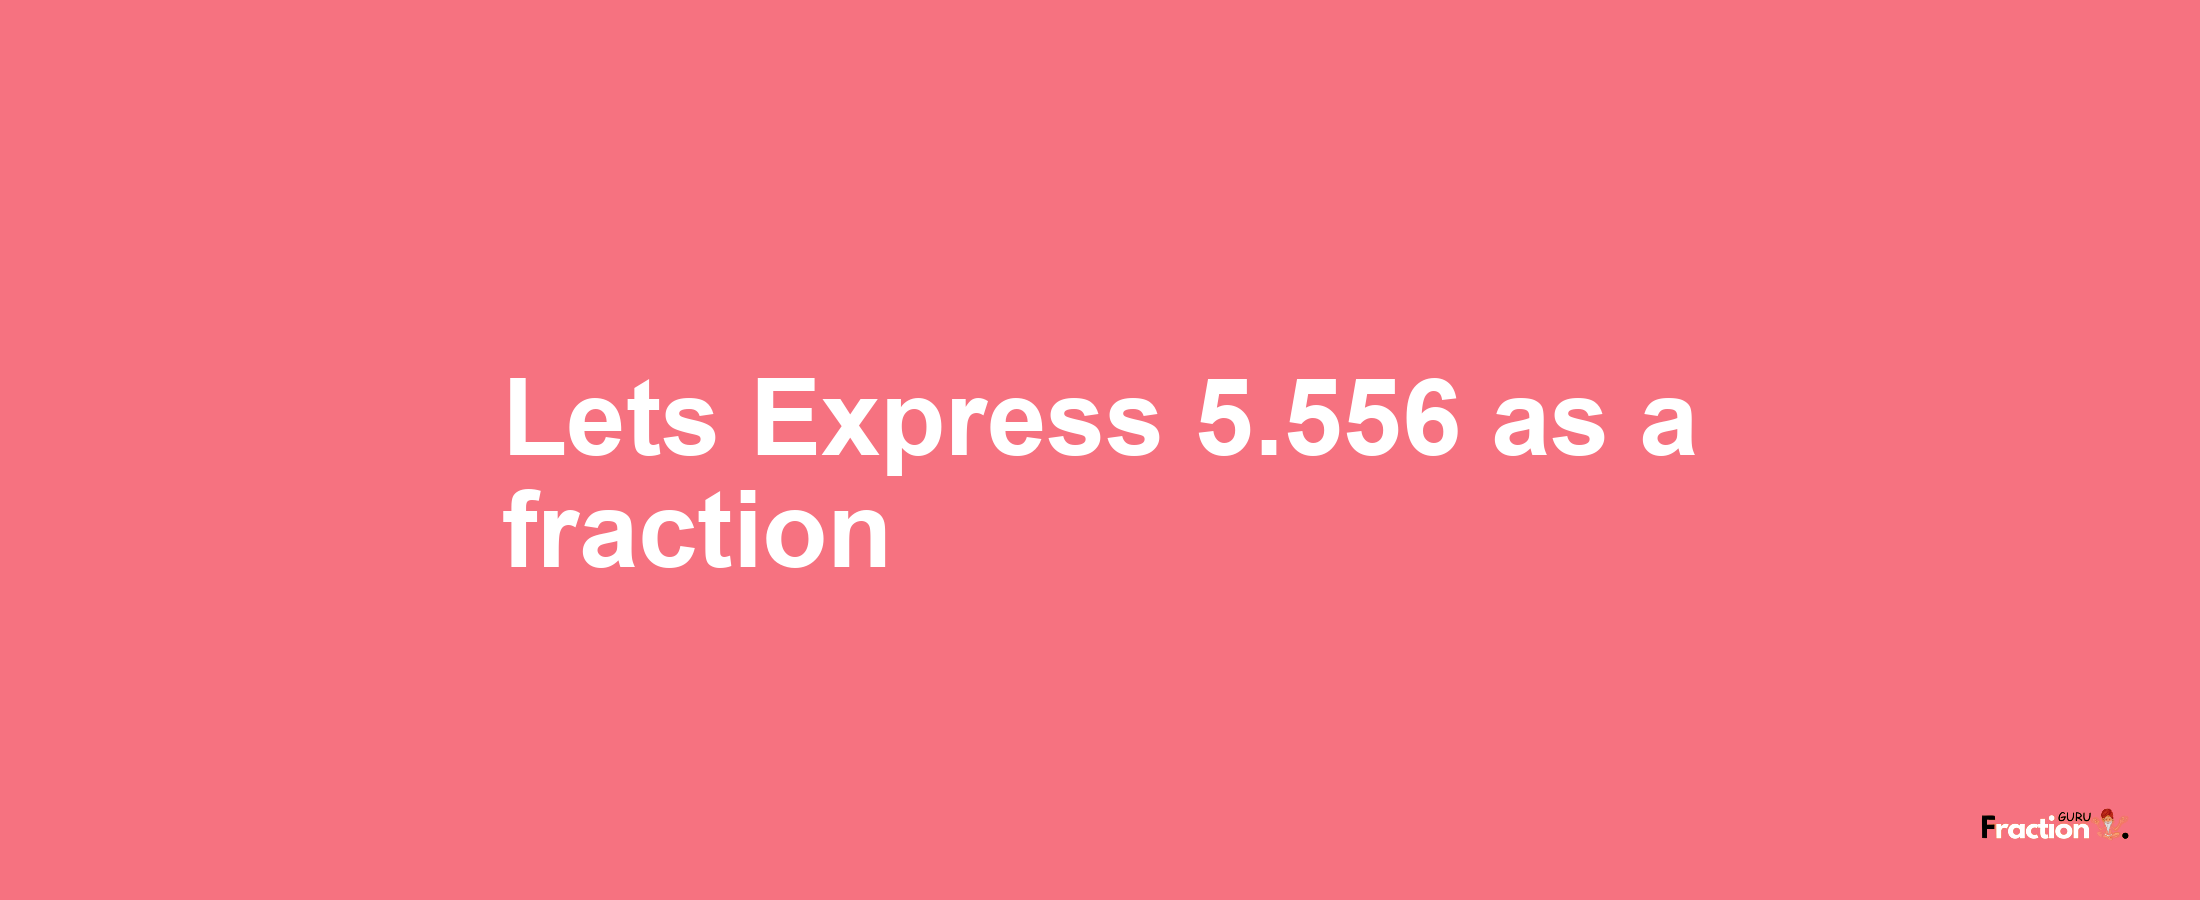 Lets Express 5.556 as afraction